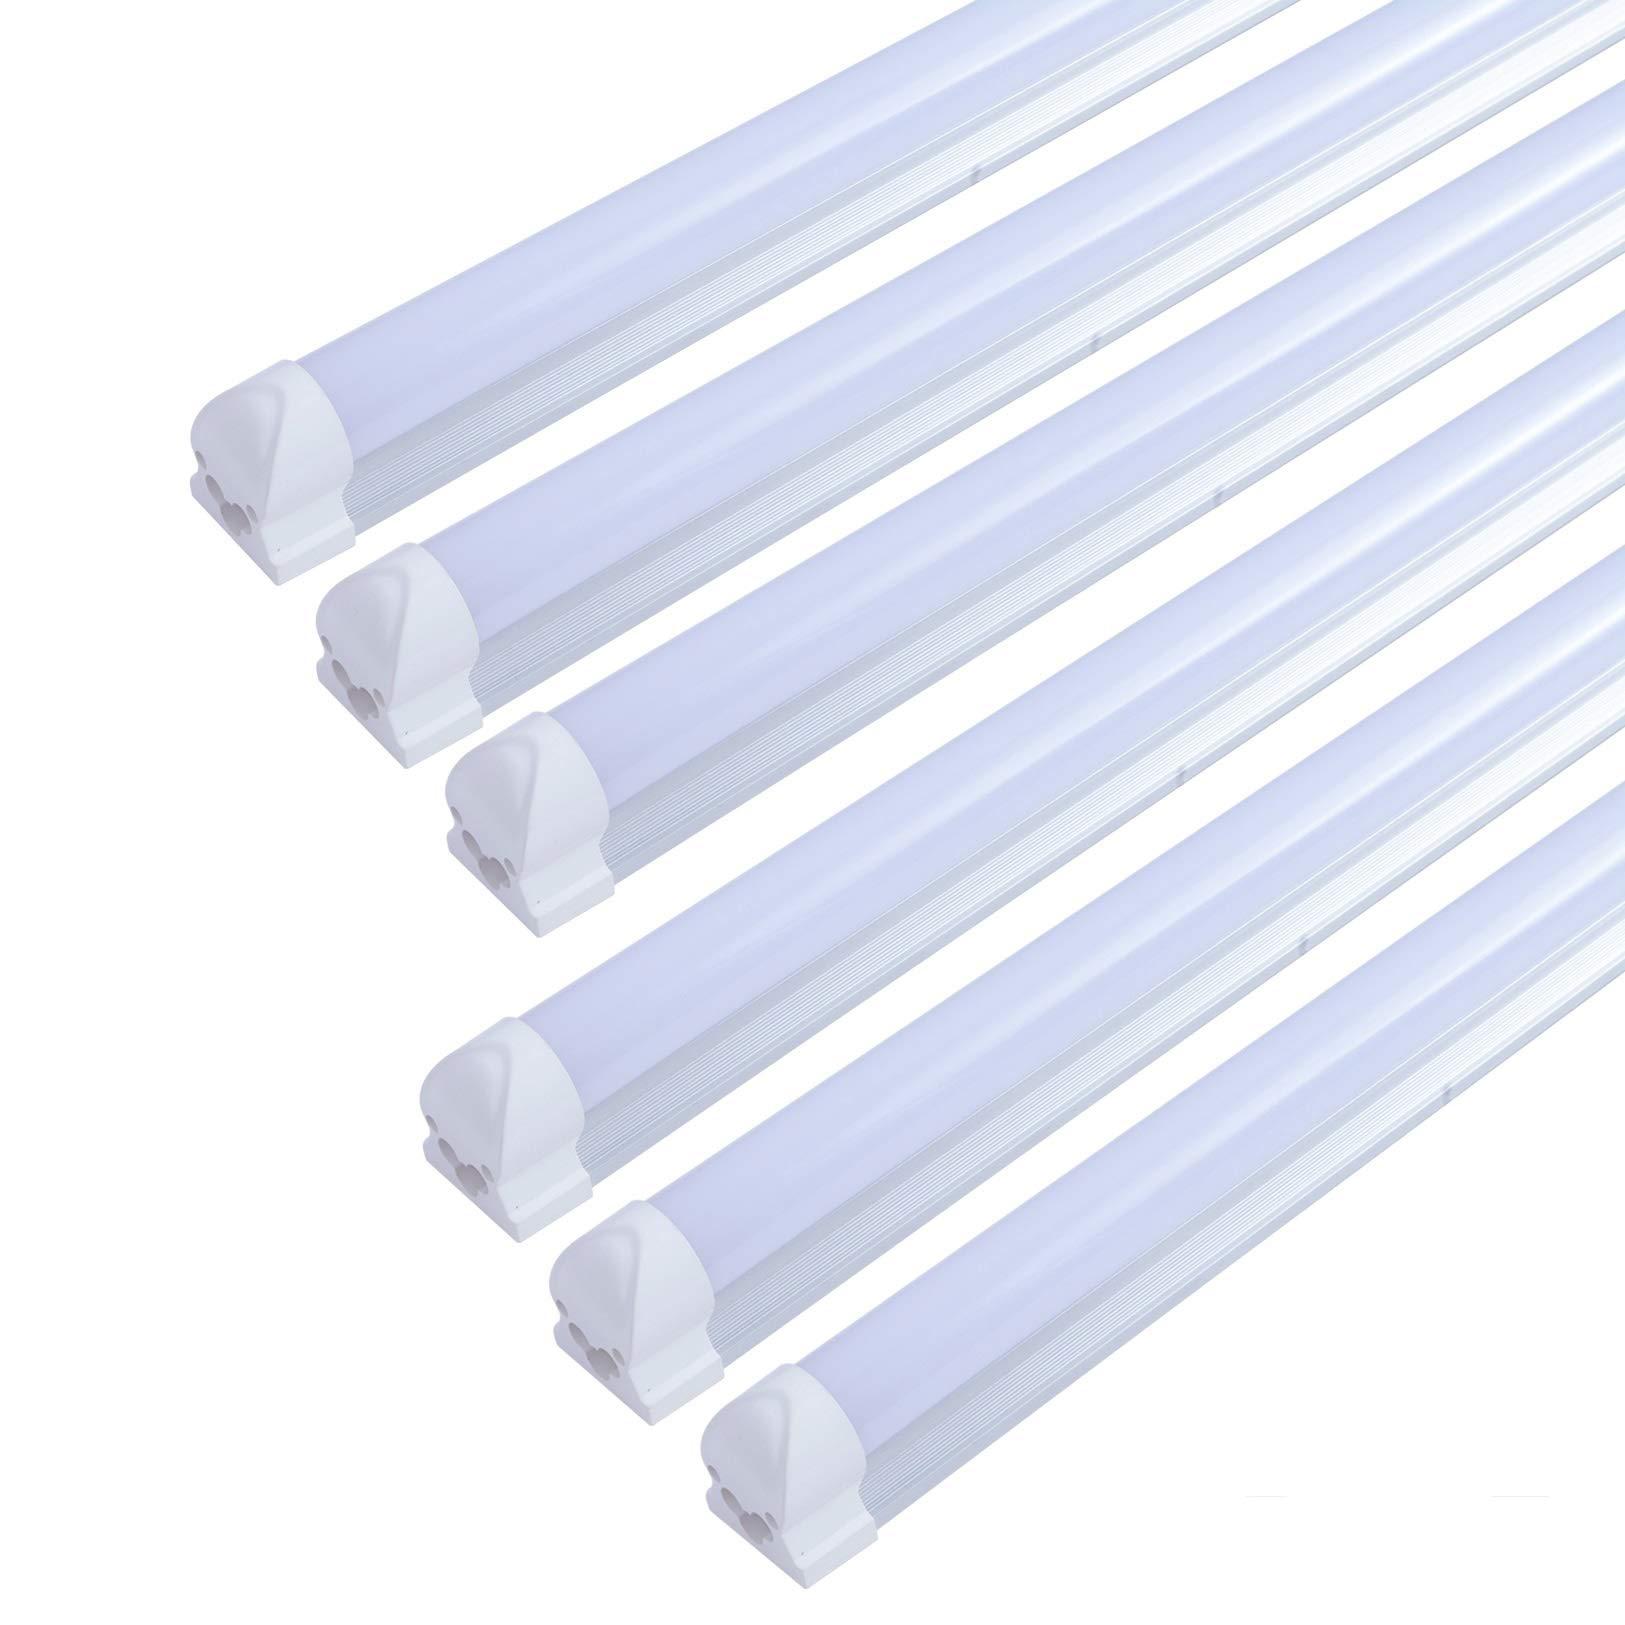 signmark 6 pack t8 4ft 24w led integrated tube light fixture,shop light with on/off switch power line,utility linkable lighting daylig